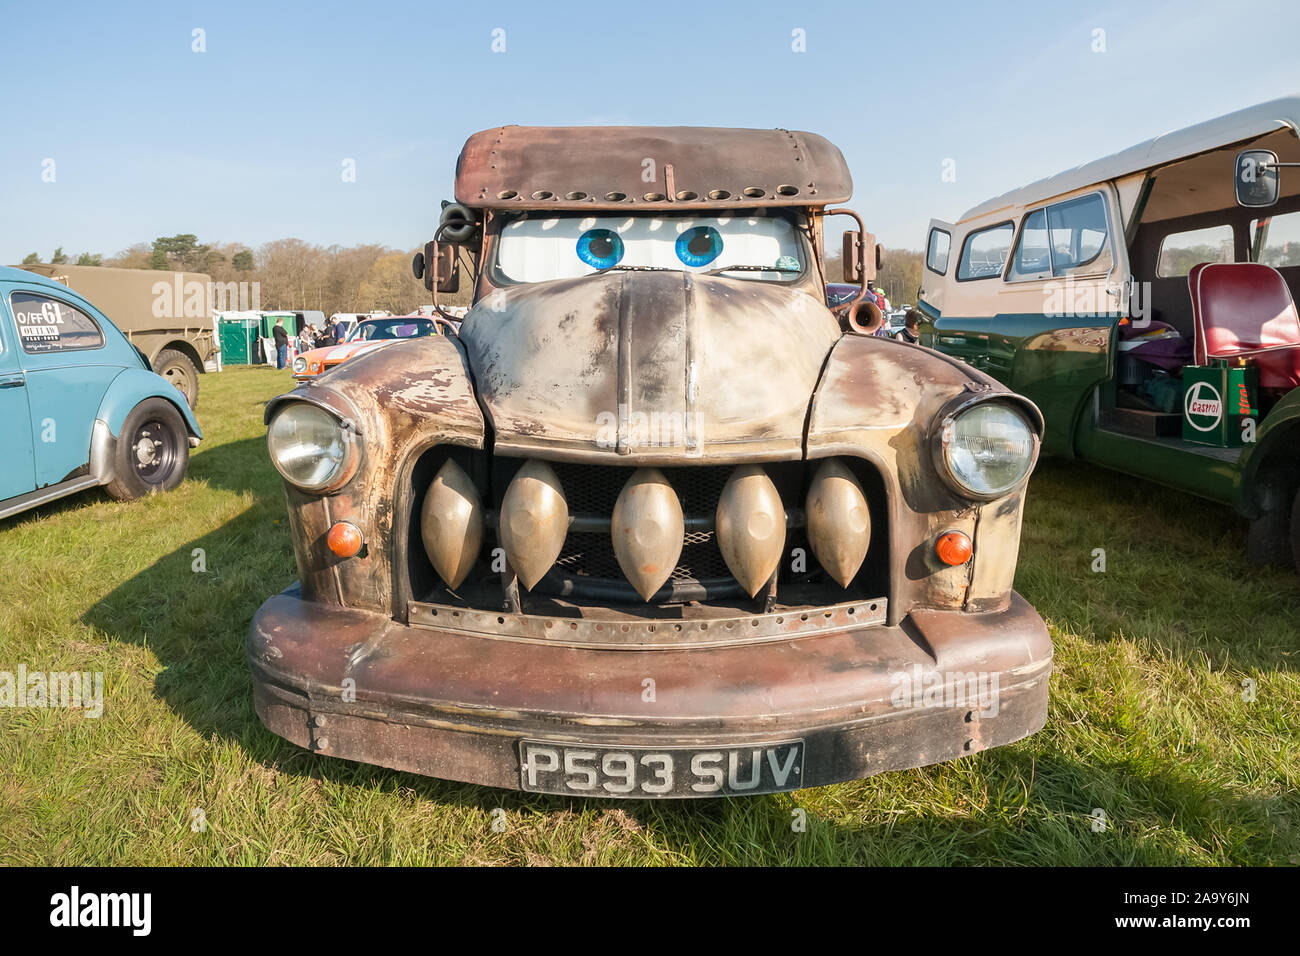 Cartoon character truck with rusting patina bodywork at a meeting of classic vehicles in Rushmoor UK on April 19, 2019 Stock Photo